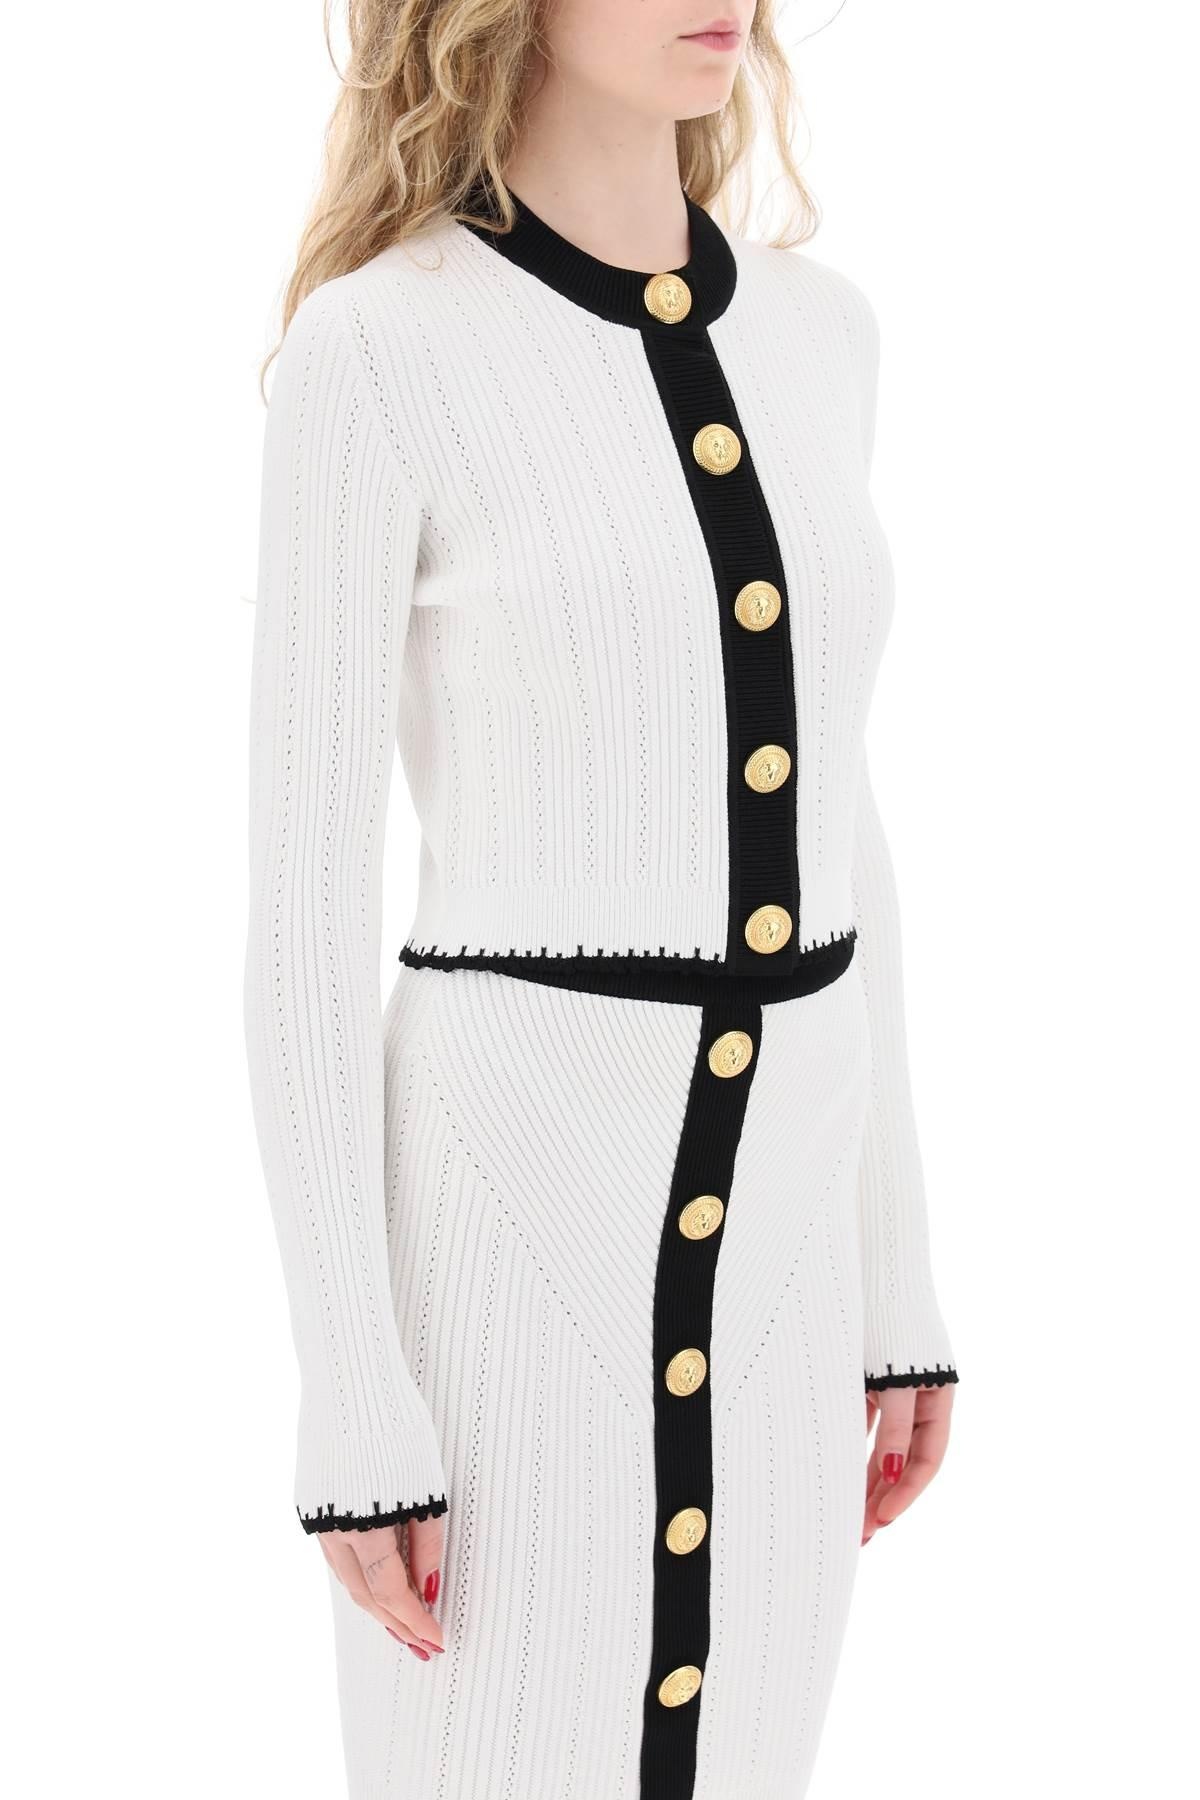 Balmain Bicolor Knit Cardigan With Embossed Buttons - 3